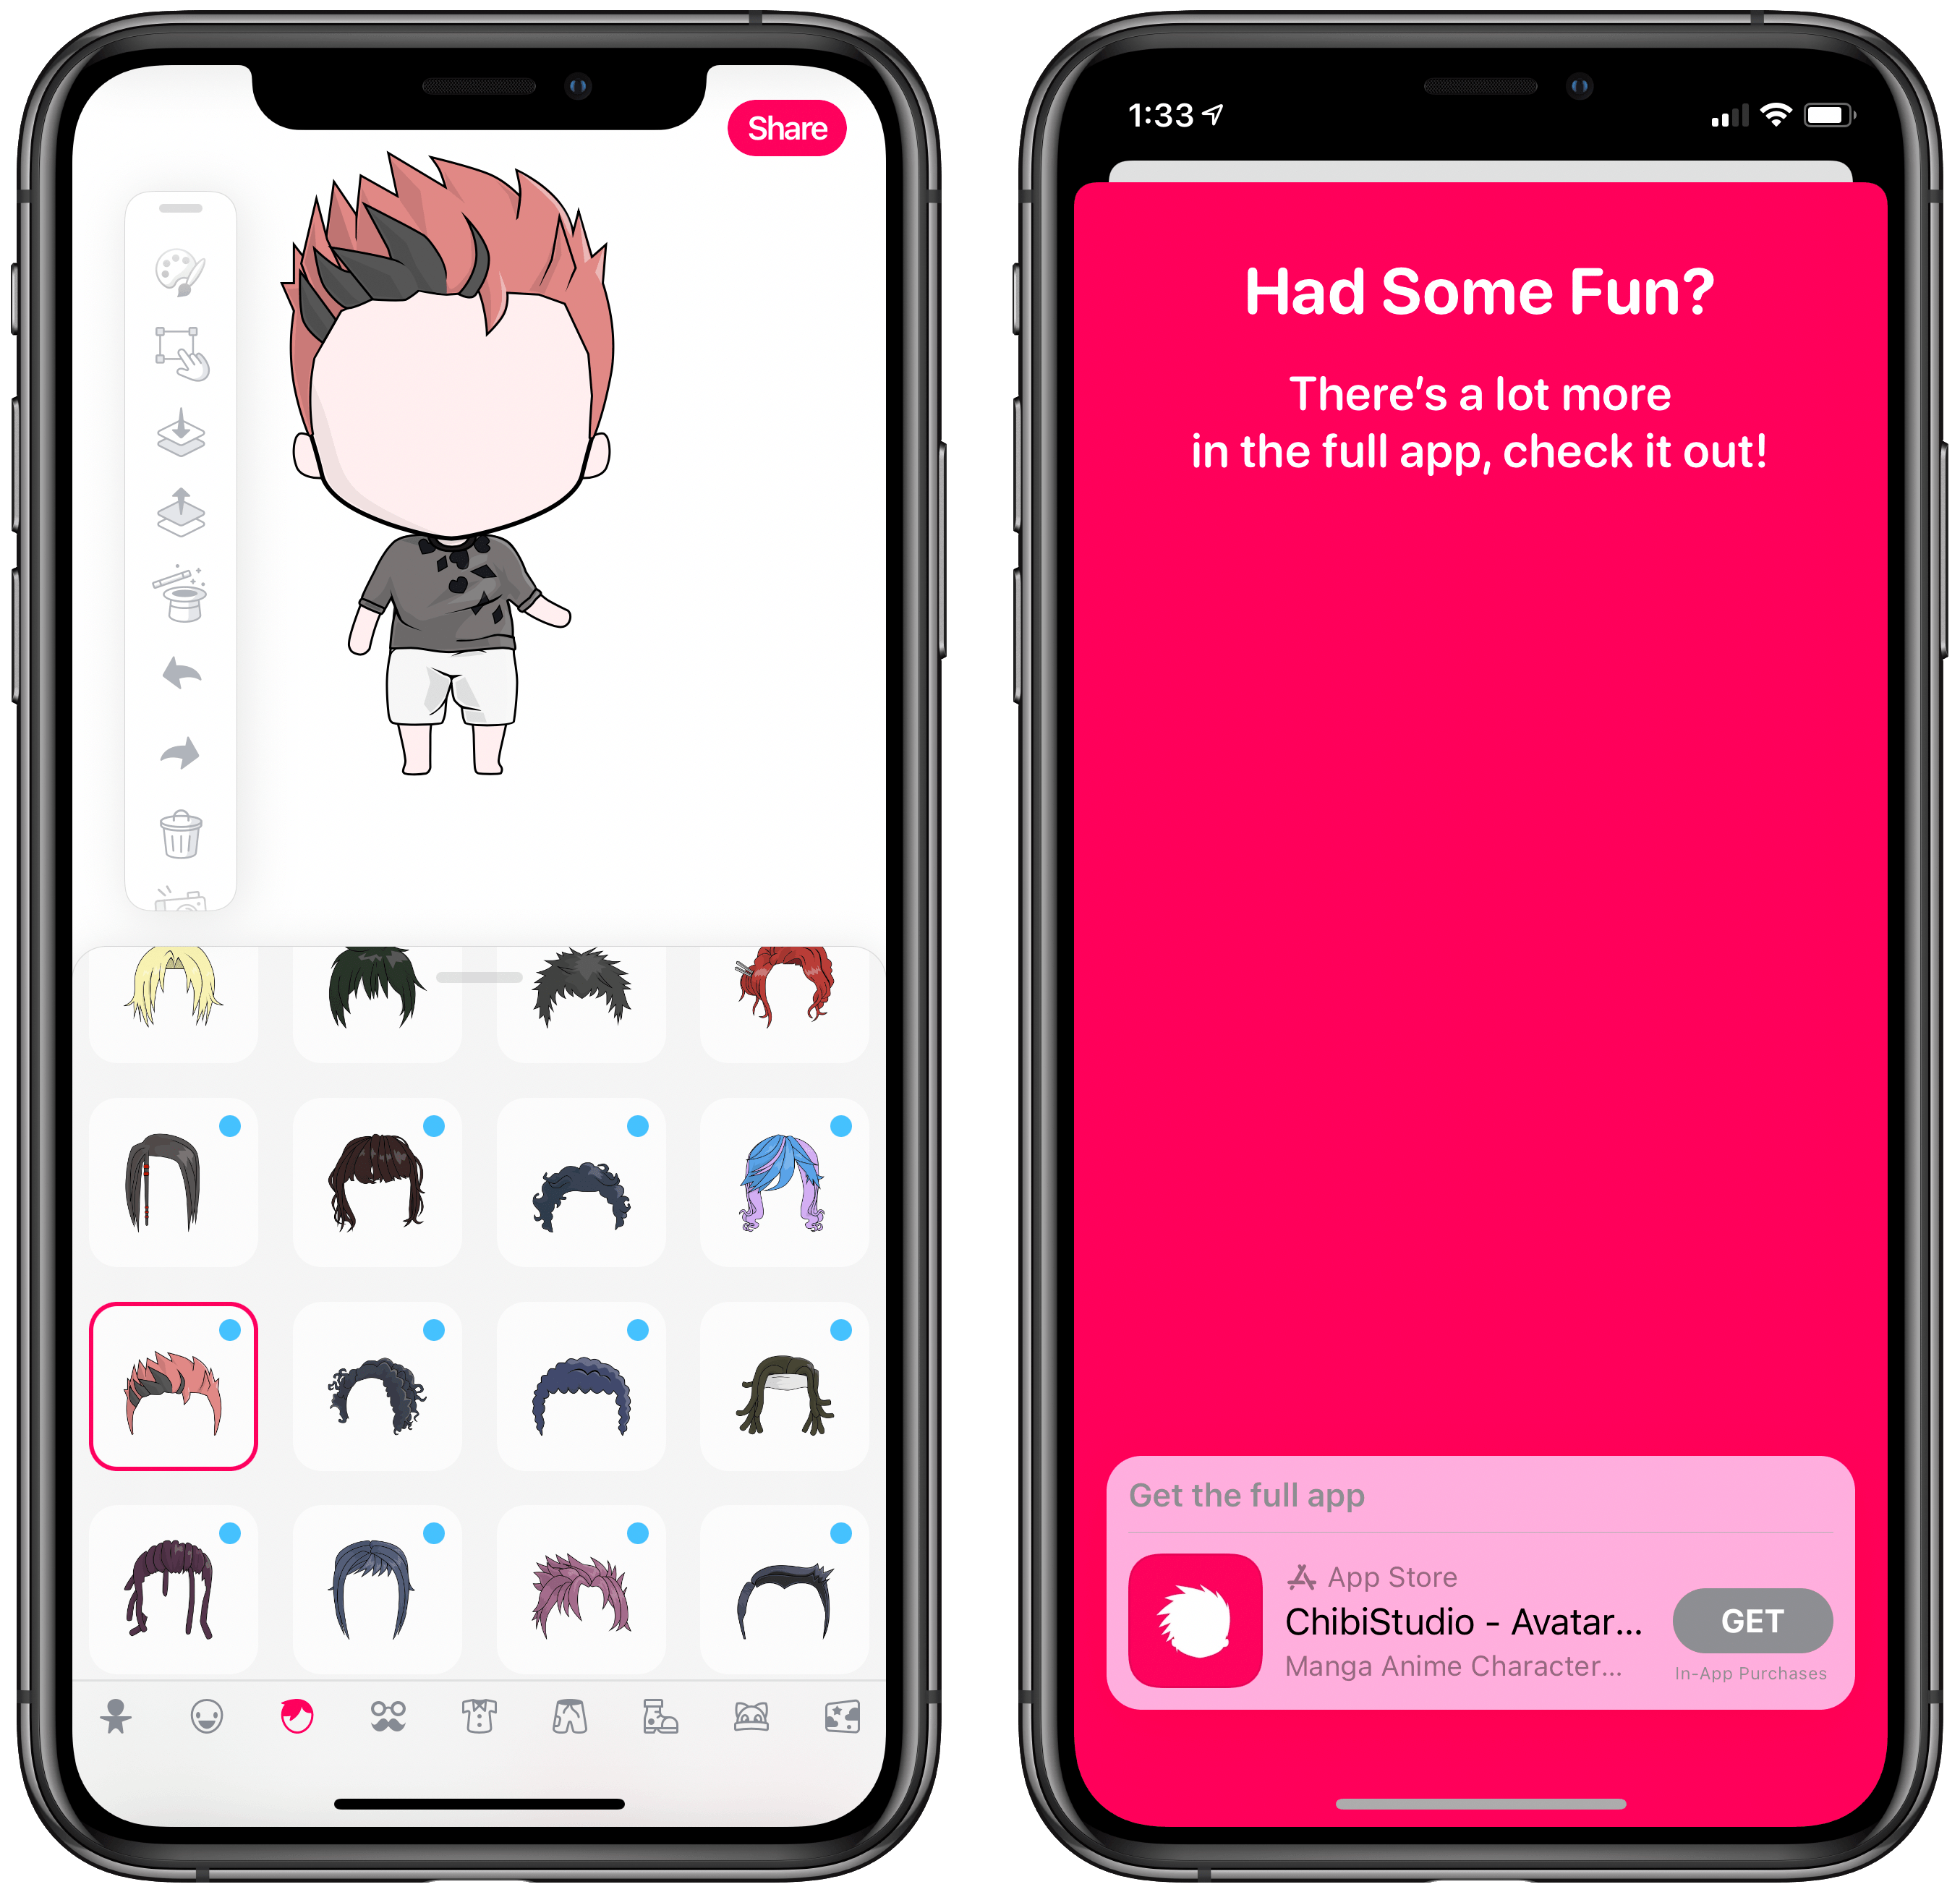 ChibiStudio’s App Clip lets you build and share your chibi (left) then provides the option of downloading the full app (right).